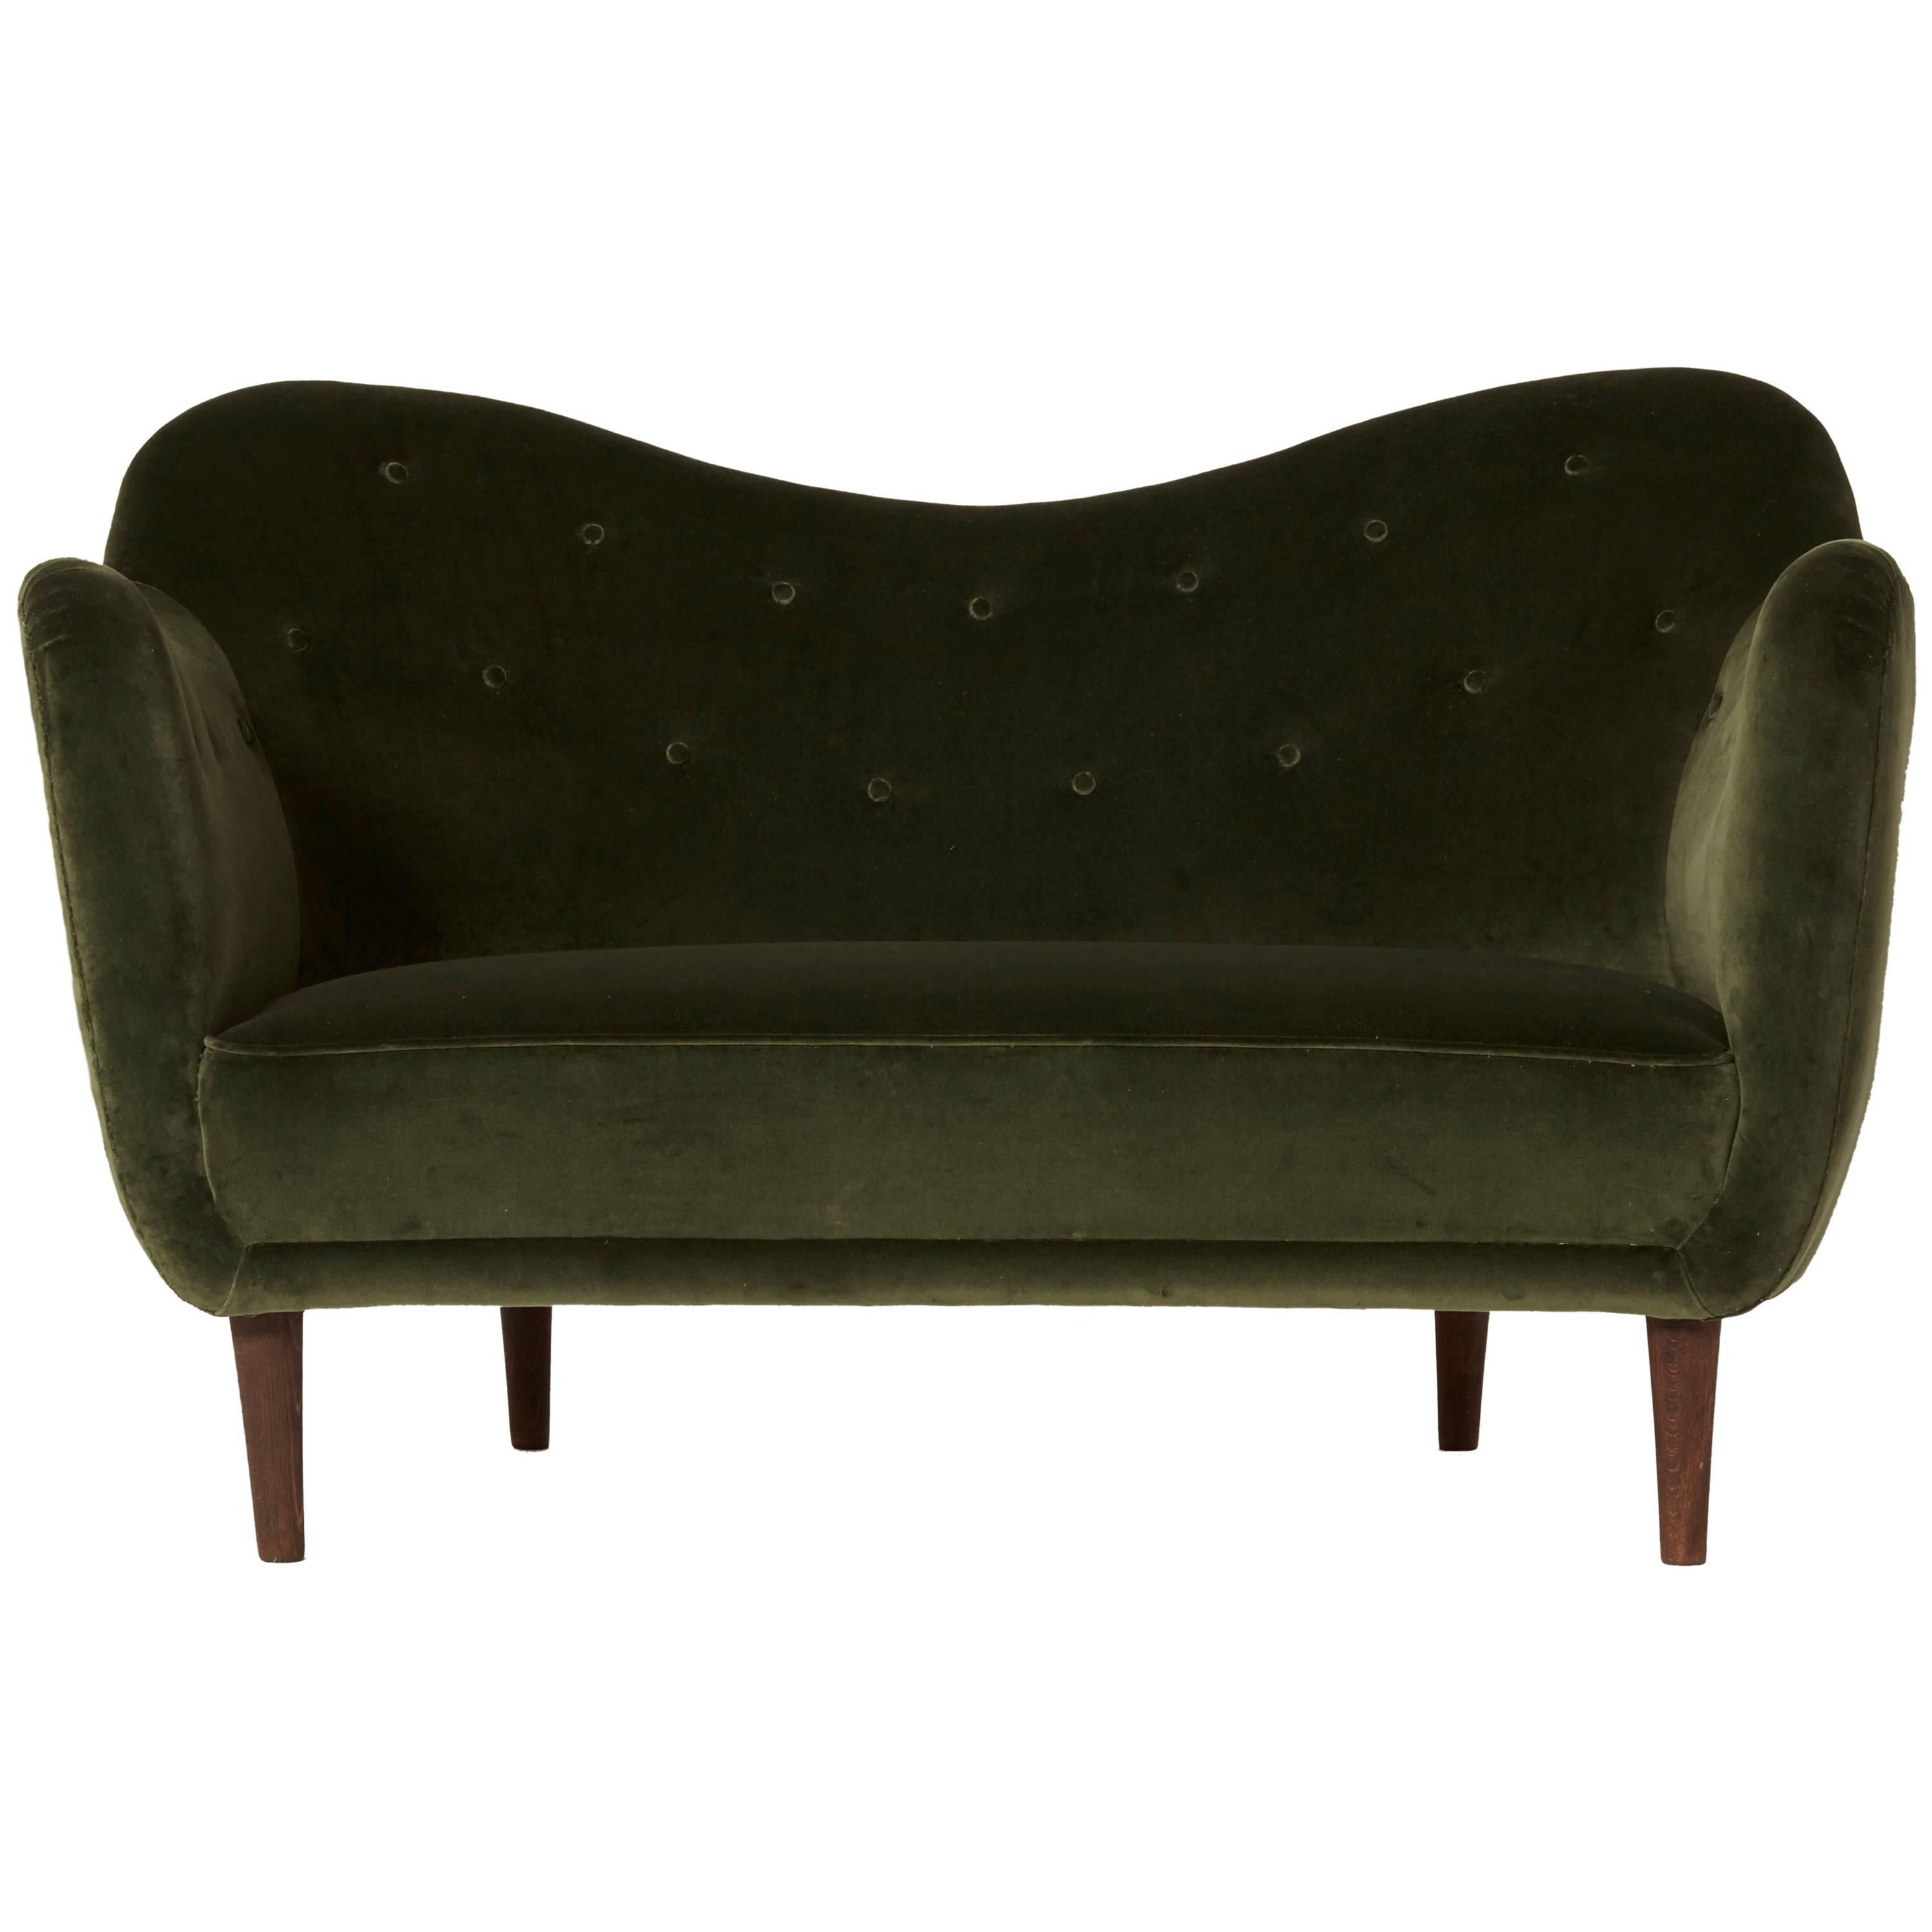 *** complimentary US shipping ***

Elegant and rare organic Finn Juhl BO64 (BO55) sofa or loveseat, in green velvet, designed in 1946 and manufactured in the late 1940s-early 1950s by Bovirke, Denmark. An iconic and rare piece.   Ships worldwide.